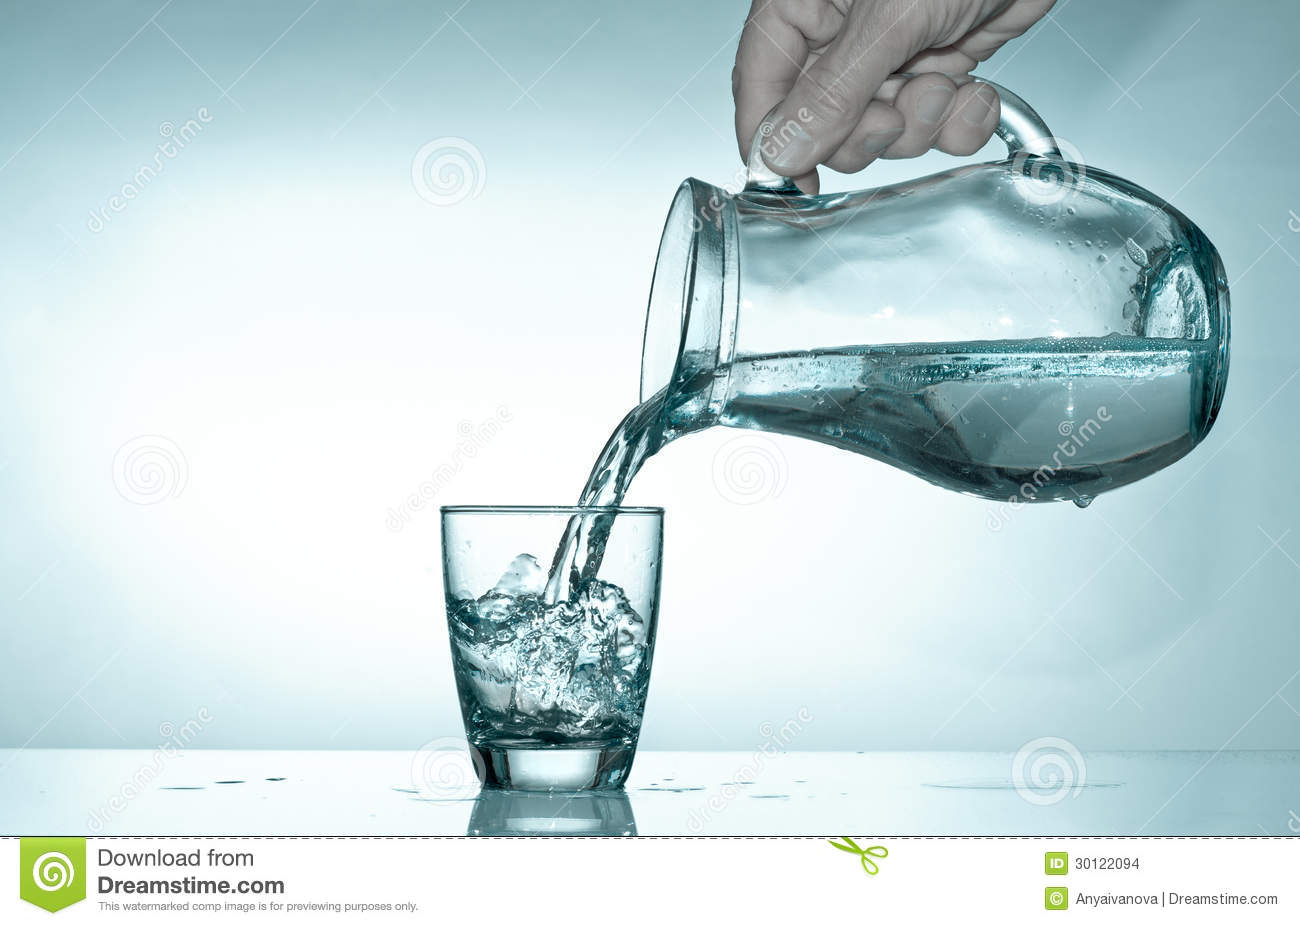 Filling The Glass From A Pitcher With Water Stock Images   Image